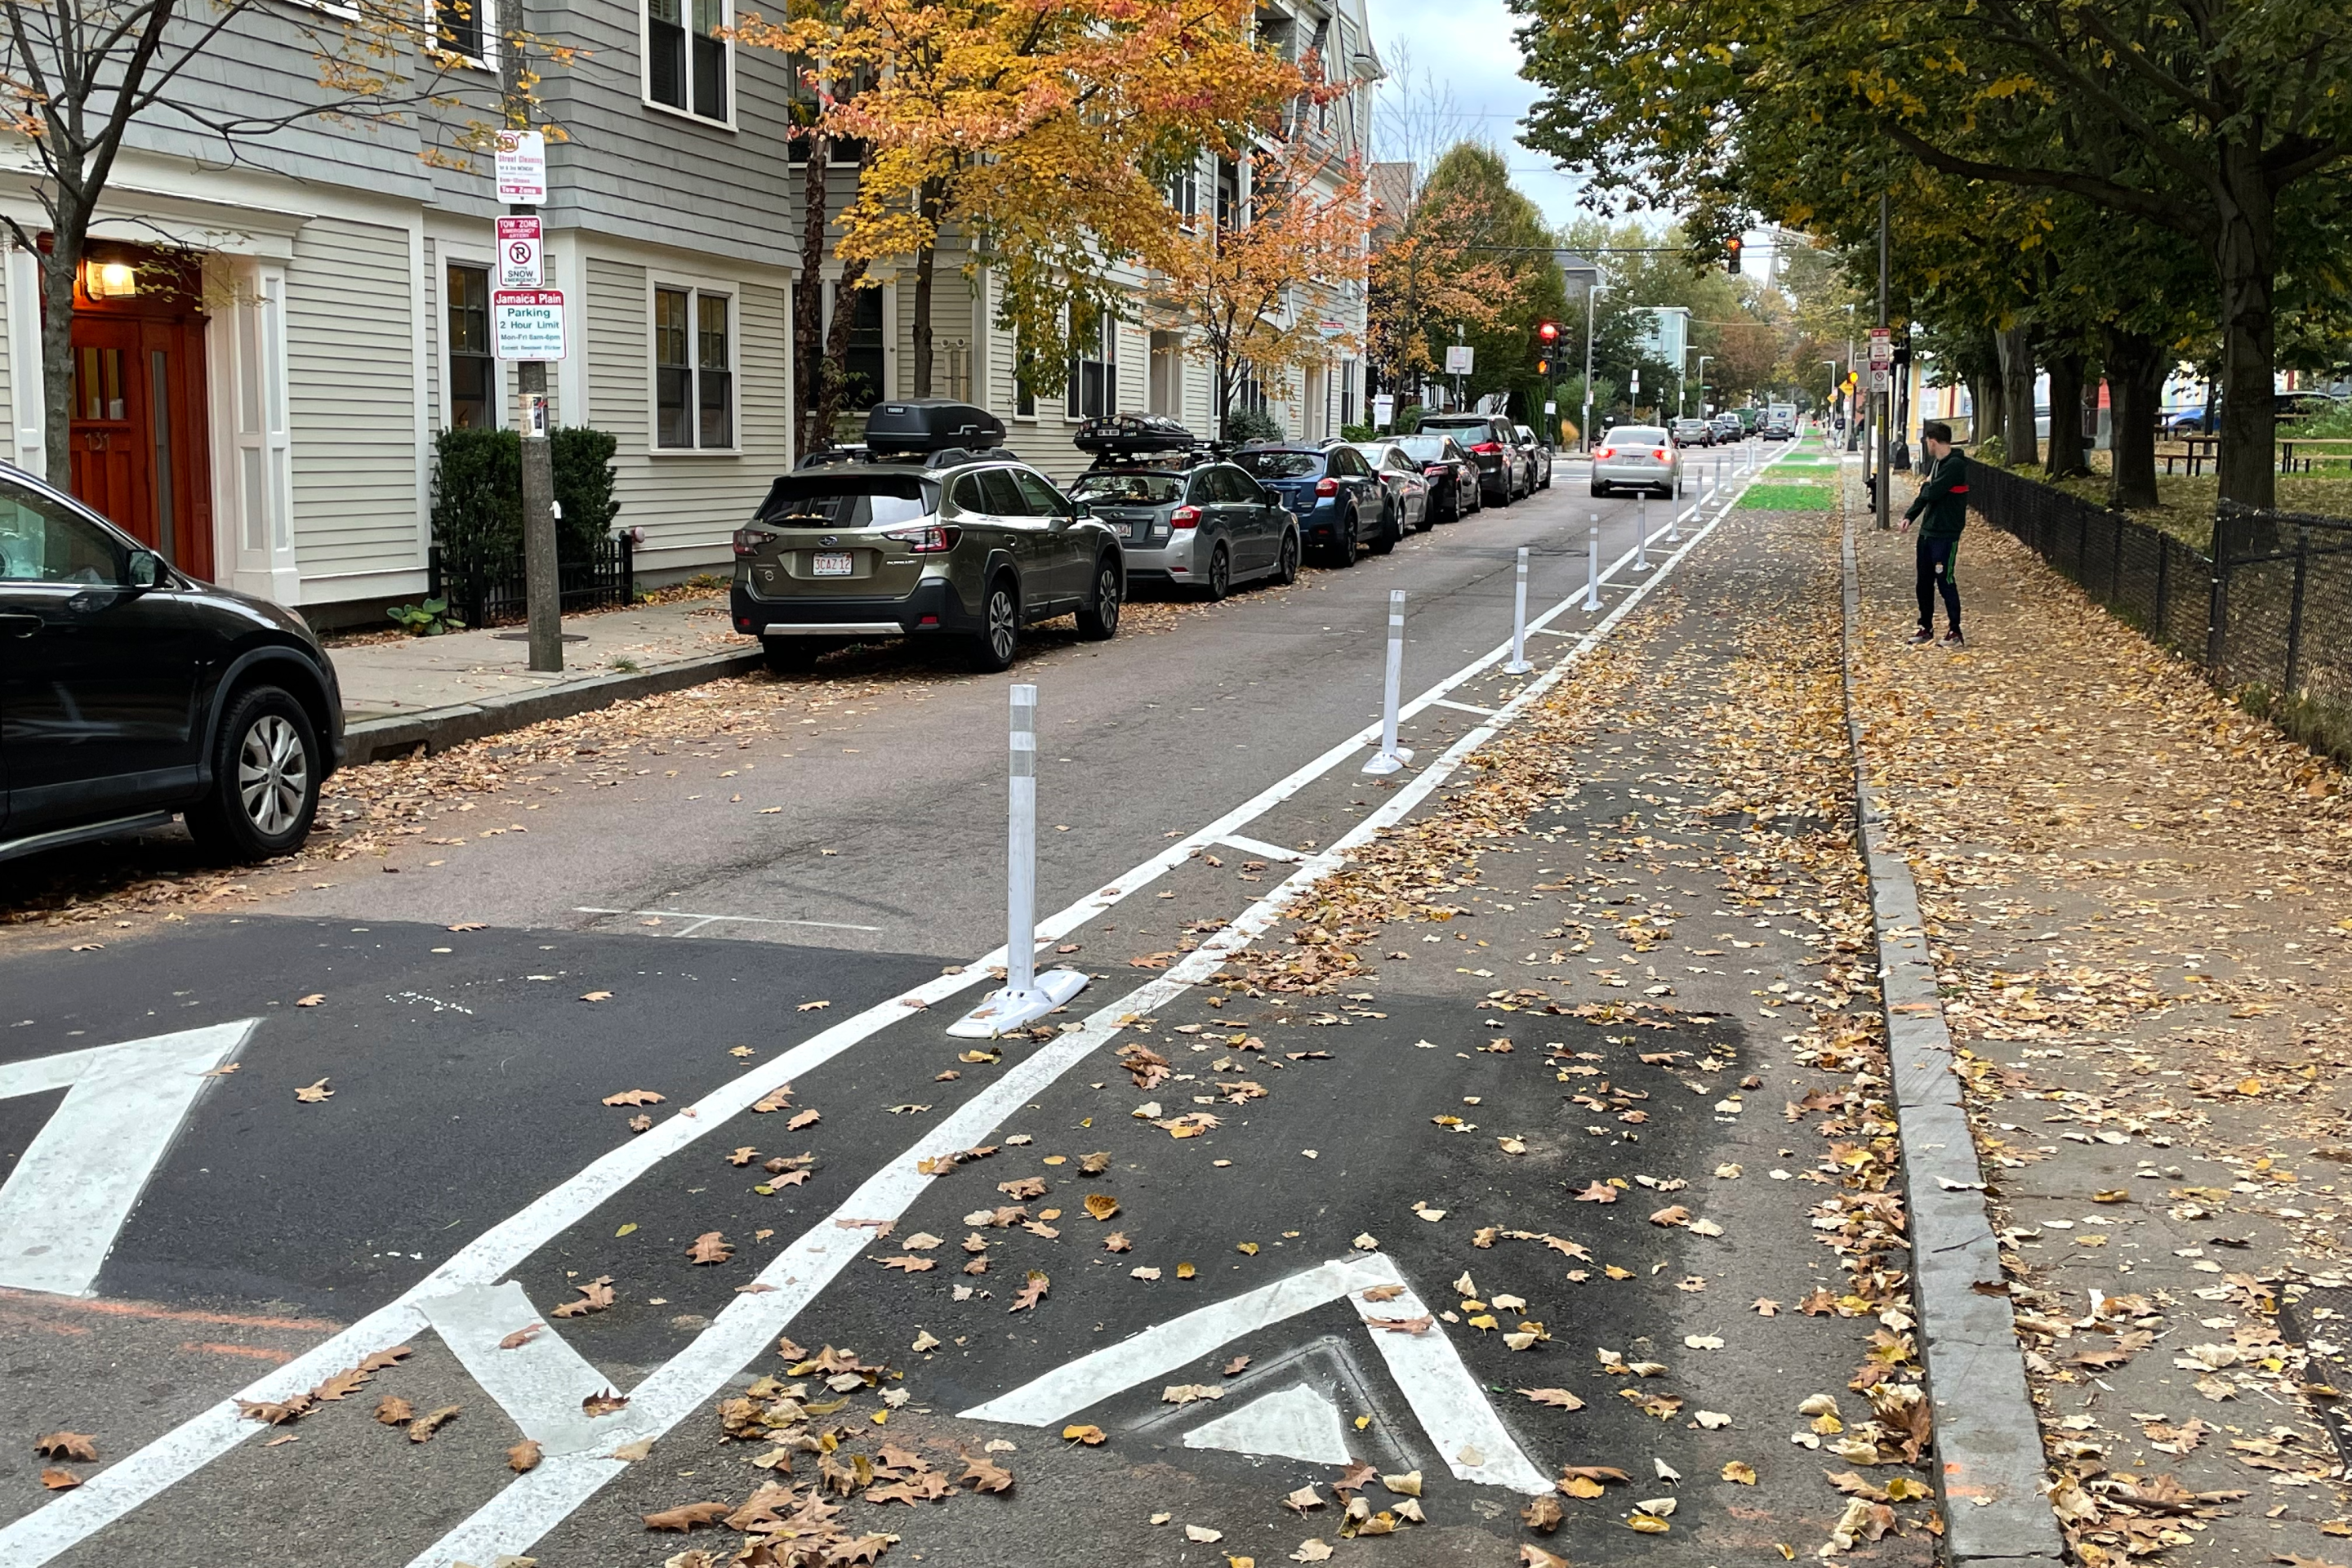 A bike lane, marked by two parallel white lines, with a row of flexible-post bollards in between the two white lines. In the foreground is a speed hump marked with white triangles. A row of cars is parked on the left side of the street. The Lamartine Street traffic signal is visible in the distance.